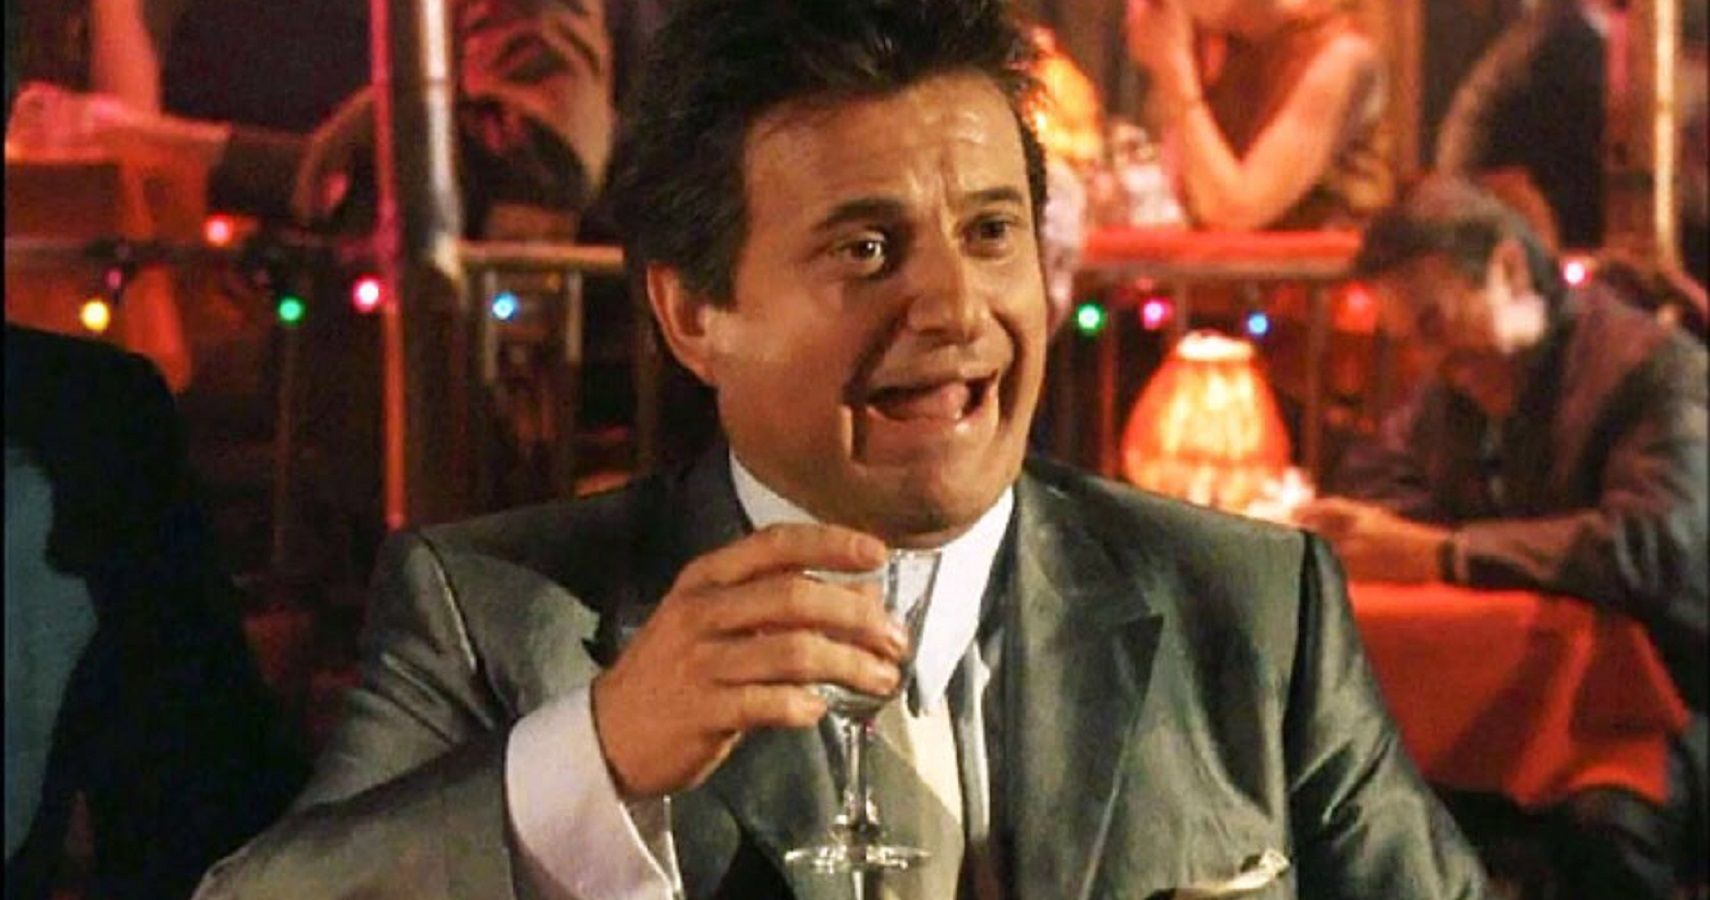 How Joe Pesci Became A Hollywood Icon And Made His $50 Million Fortune